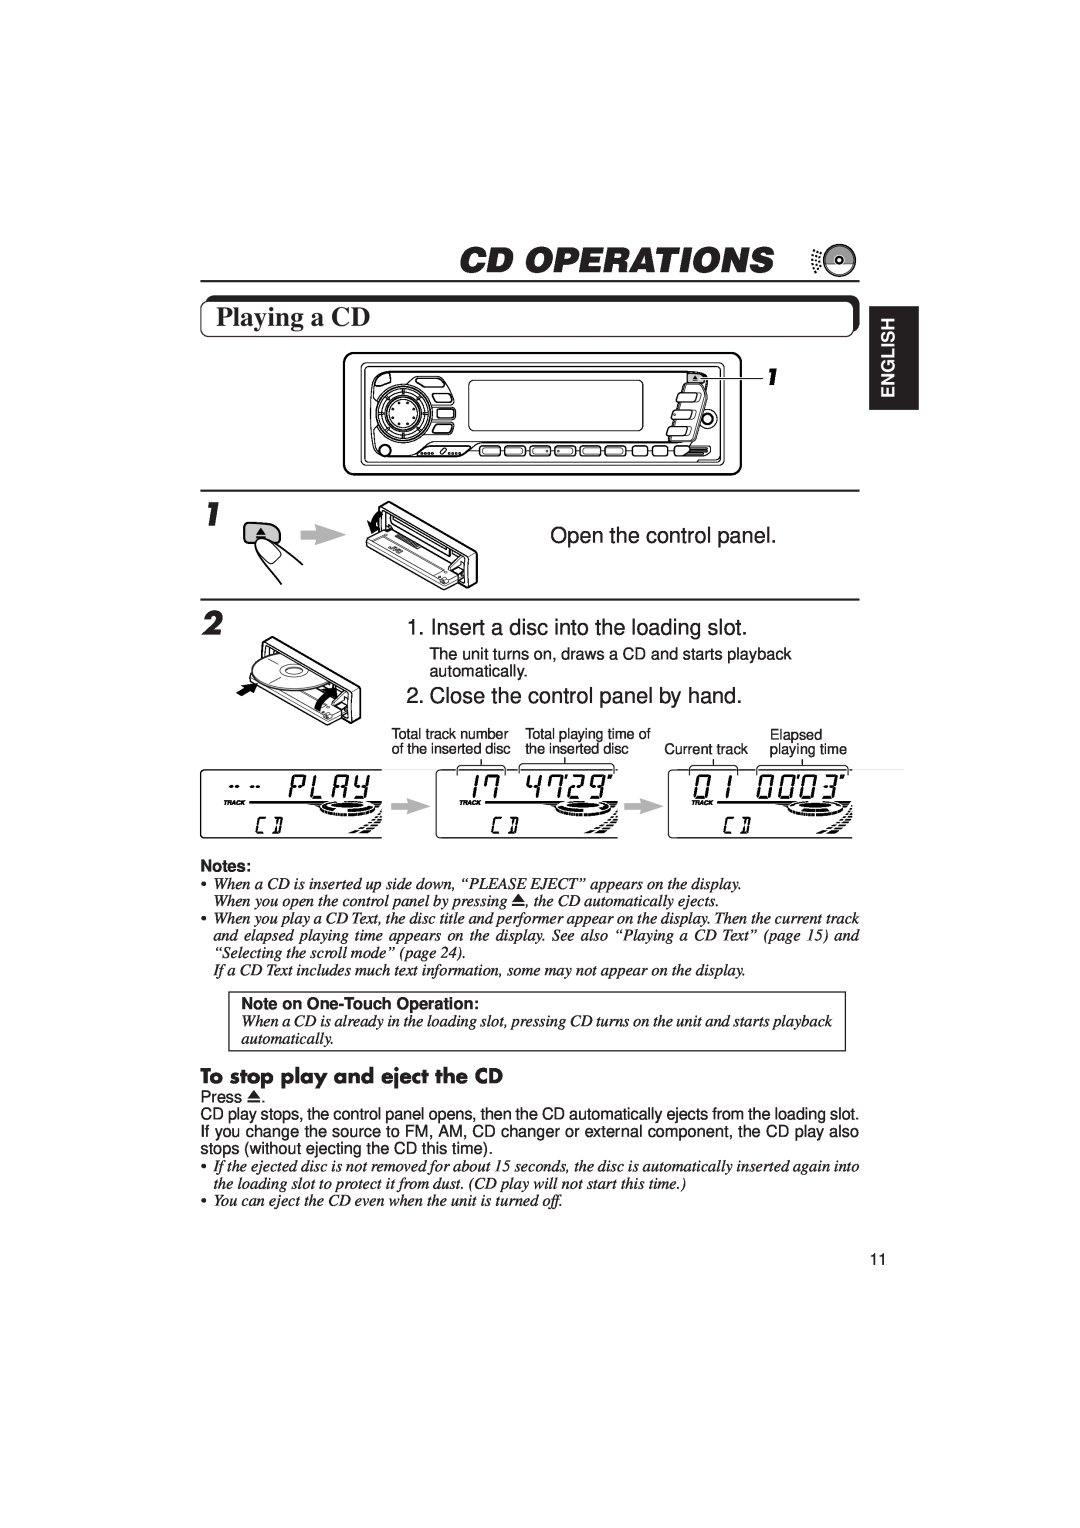 JVC KD-SX940, KD-SX949 manual Cd Operations, Playing a CD, To stop play and eject the CD, English 